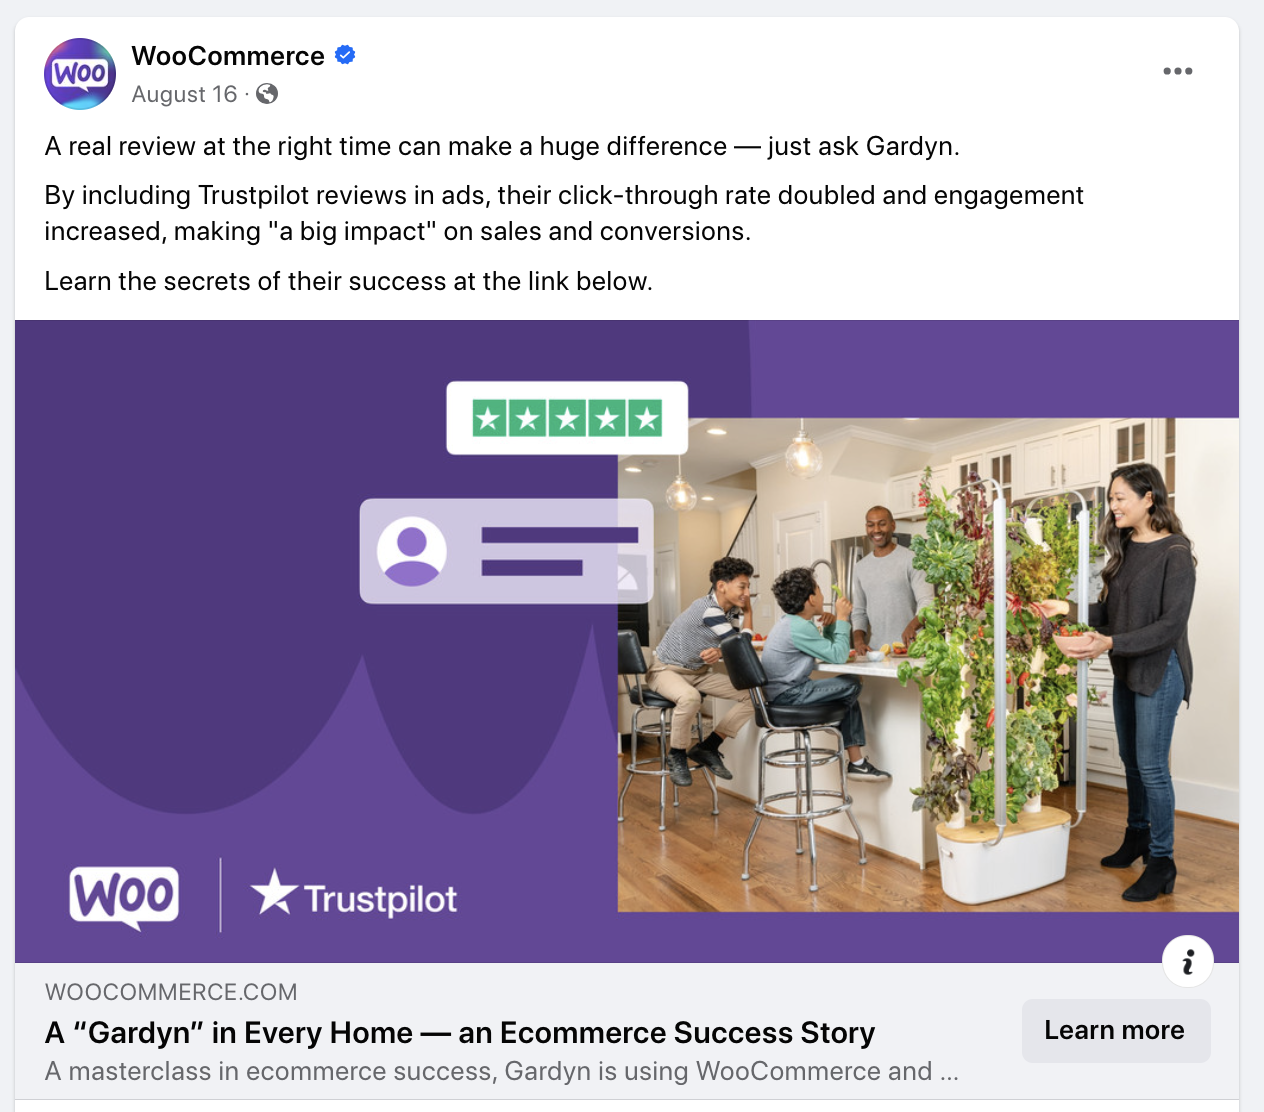 social media post from WooCommerce sharing a customer story